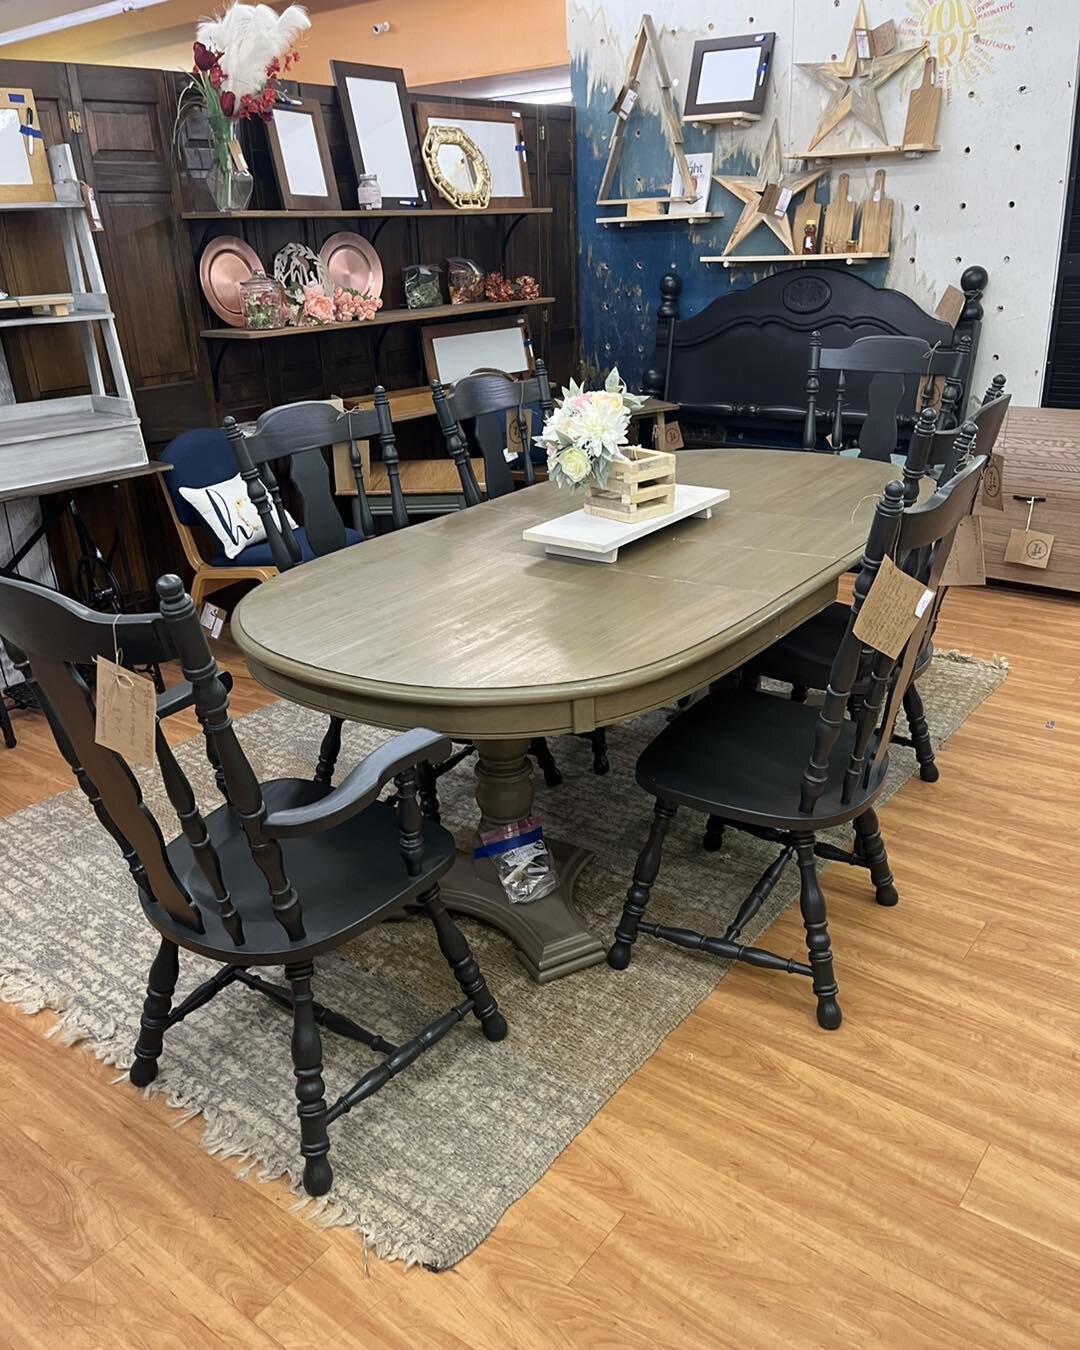 A look inside our booth this week at the Neenah Vintage Mall!

I love this place! Great people, awesome booths with talented vendors &amp; super close to home! ❤️

All items pictured are currently available, the dining set &amp; a few other pieces we